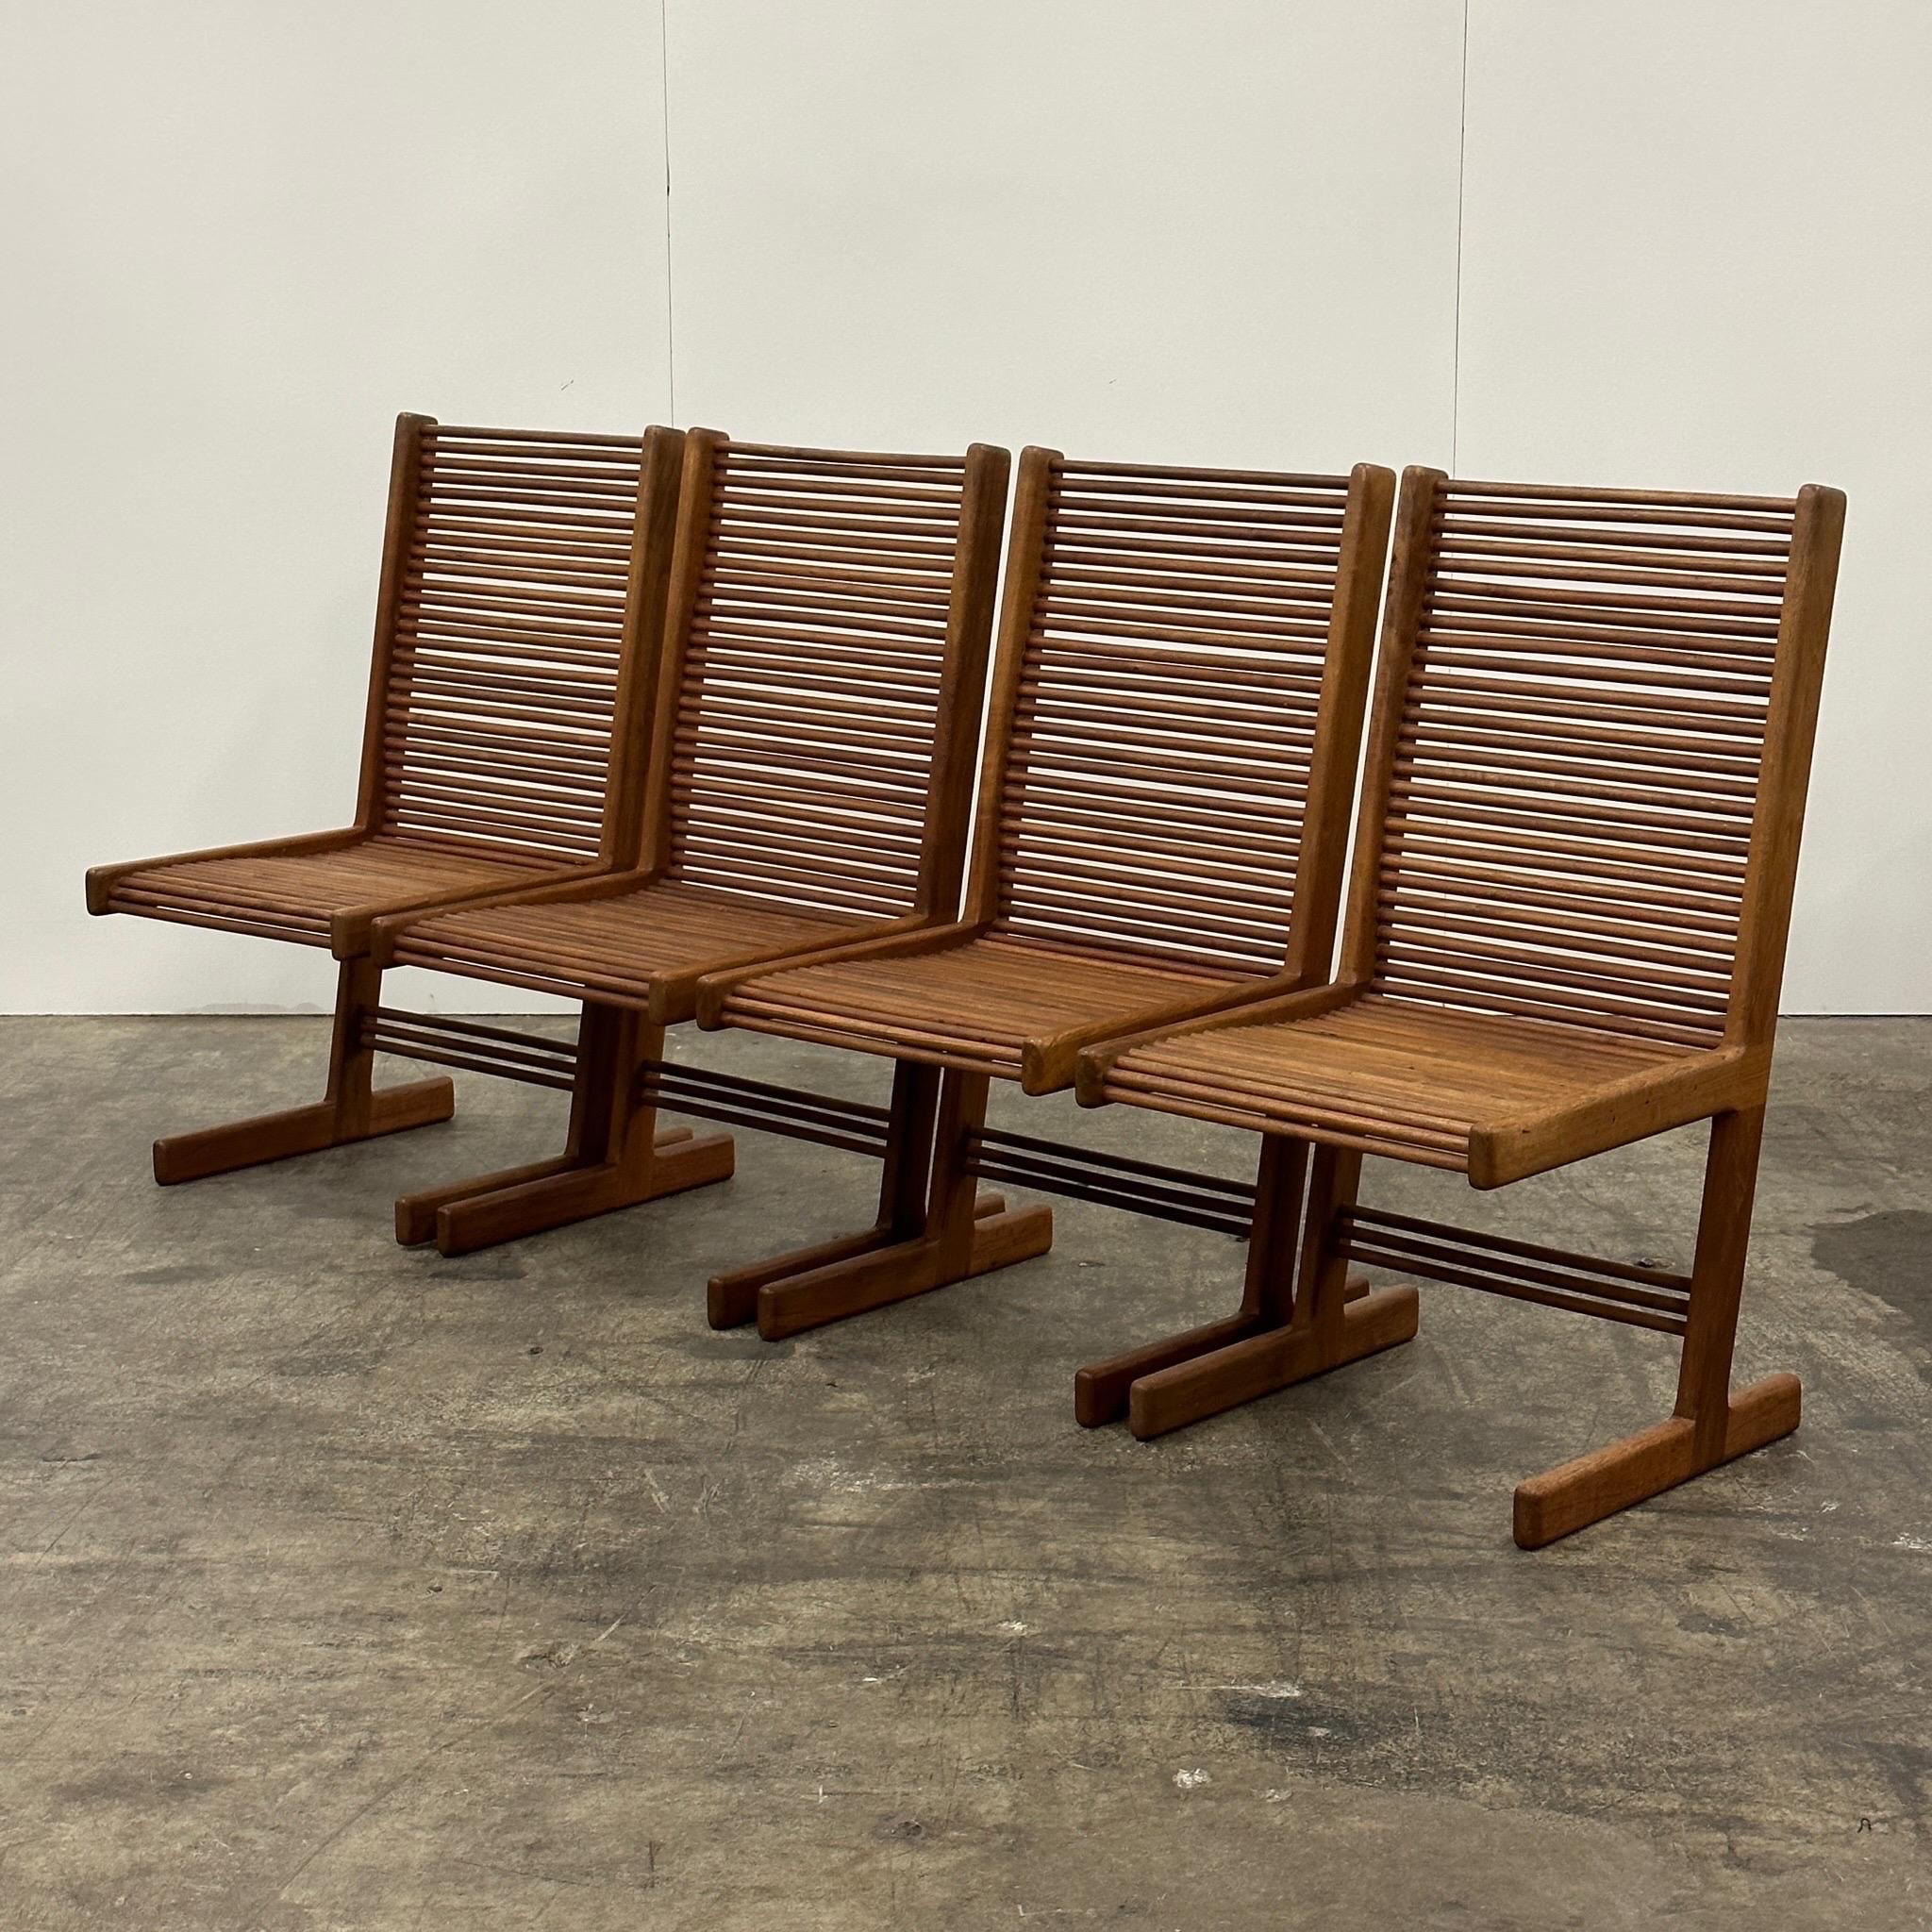 c. 1980s. Price is for the set. Contact us if you’d like to purchase a single item. Set of 6 wood dining chairs, including four armless chairs and two captains chairs. Studio made of oak.